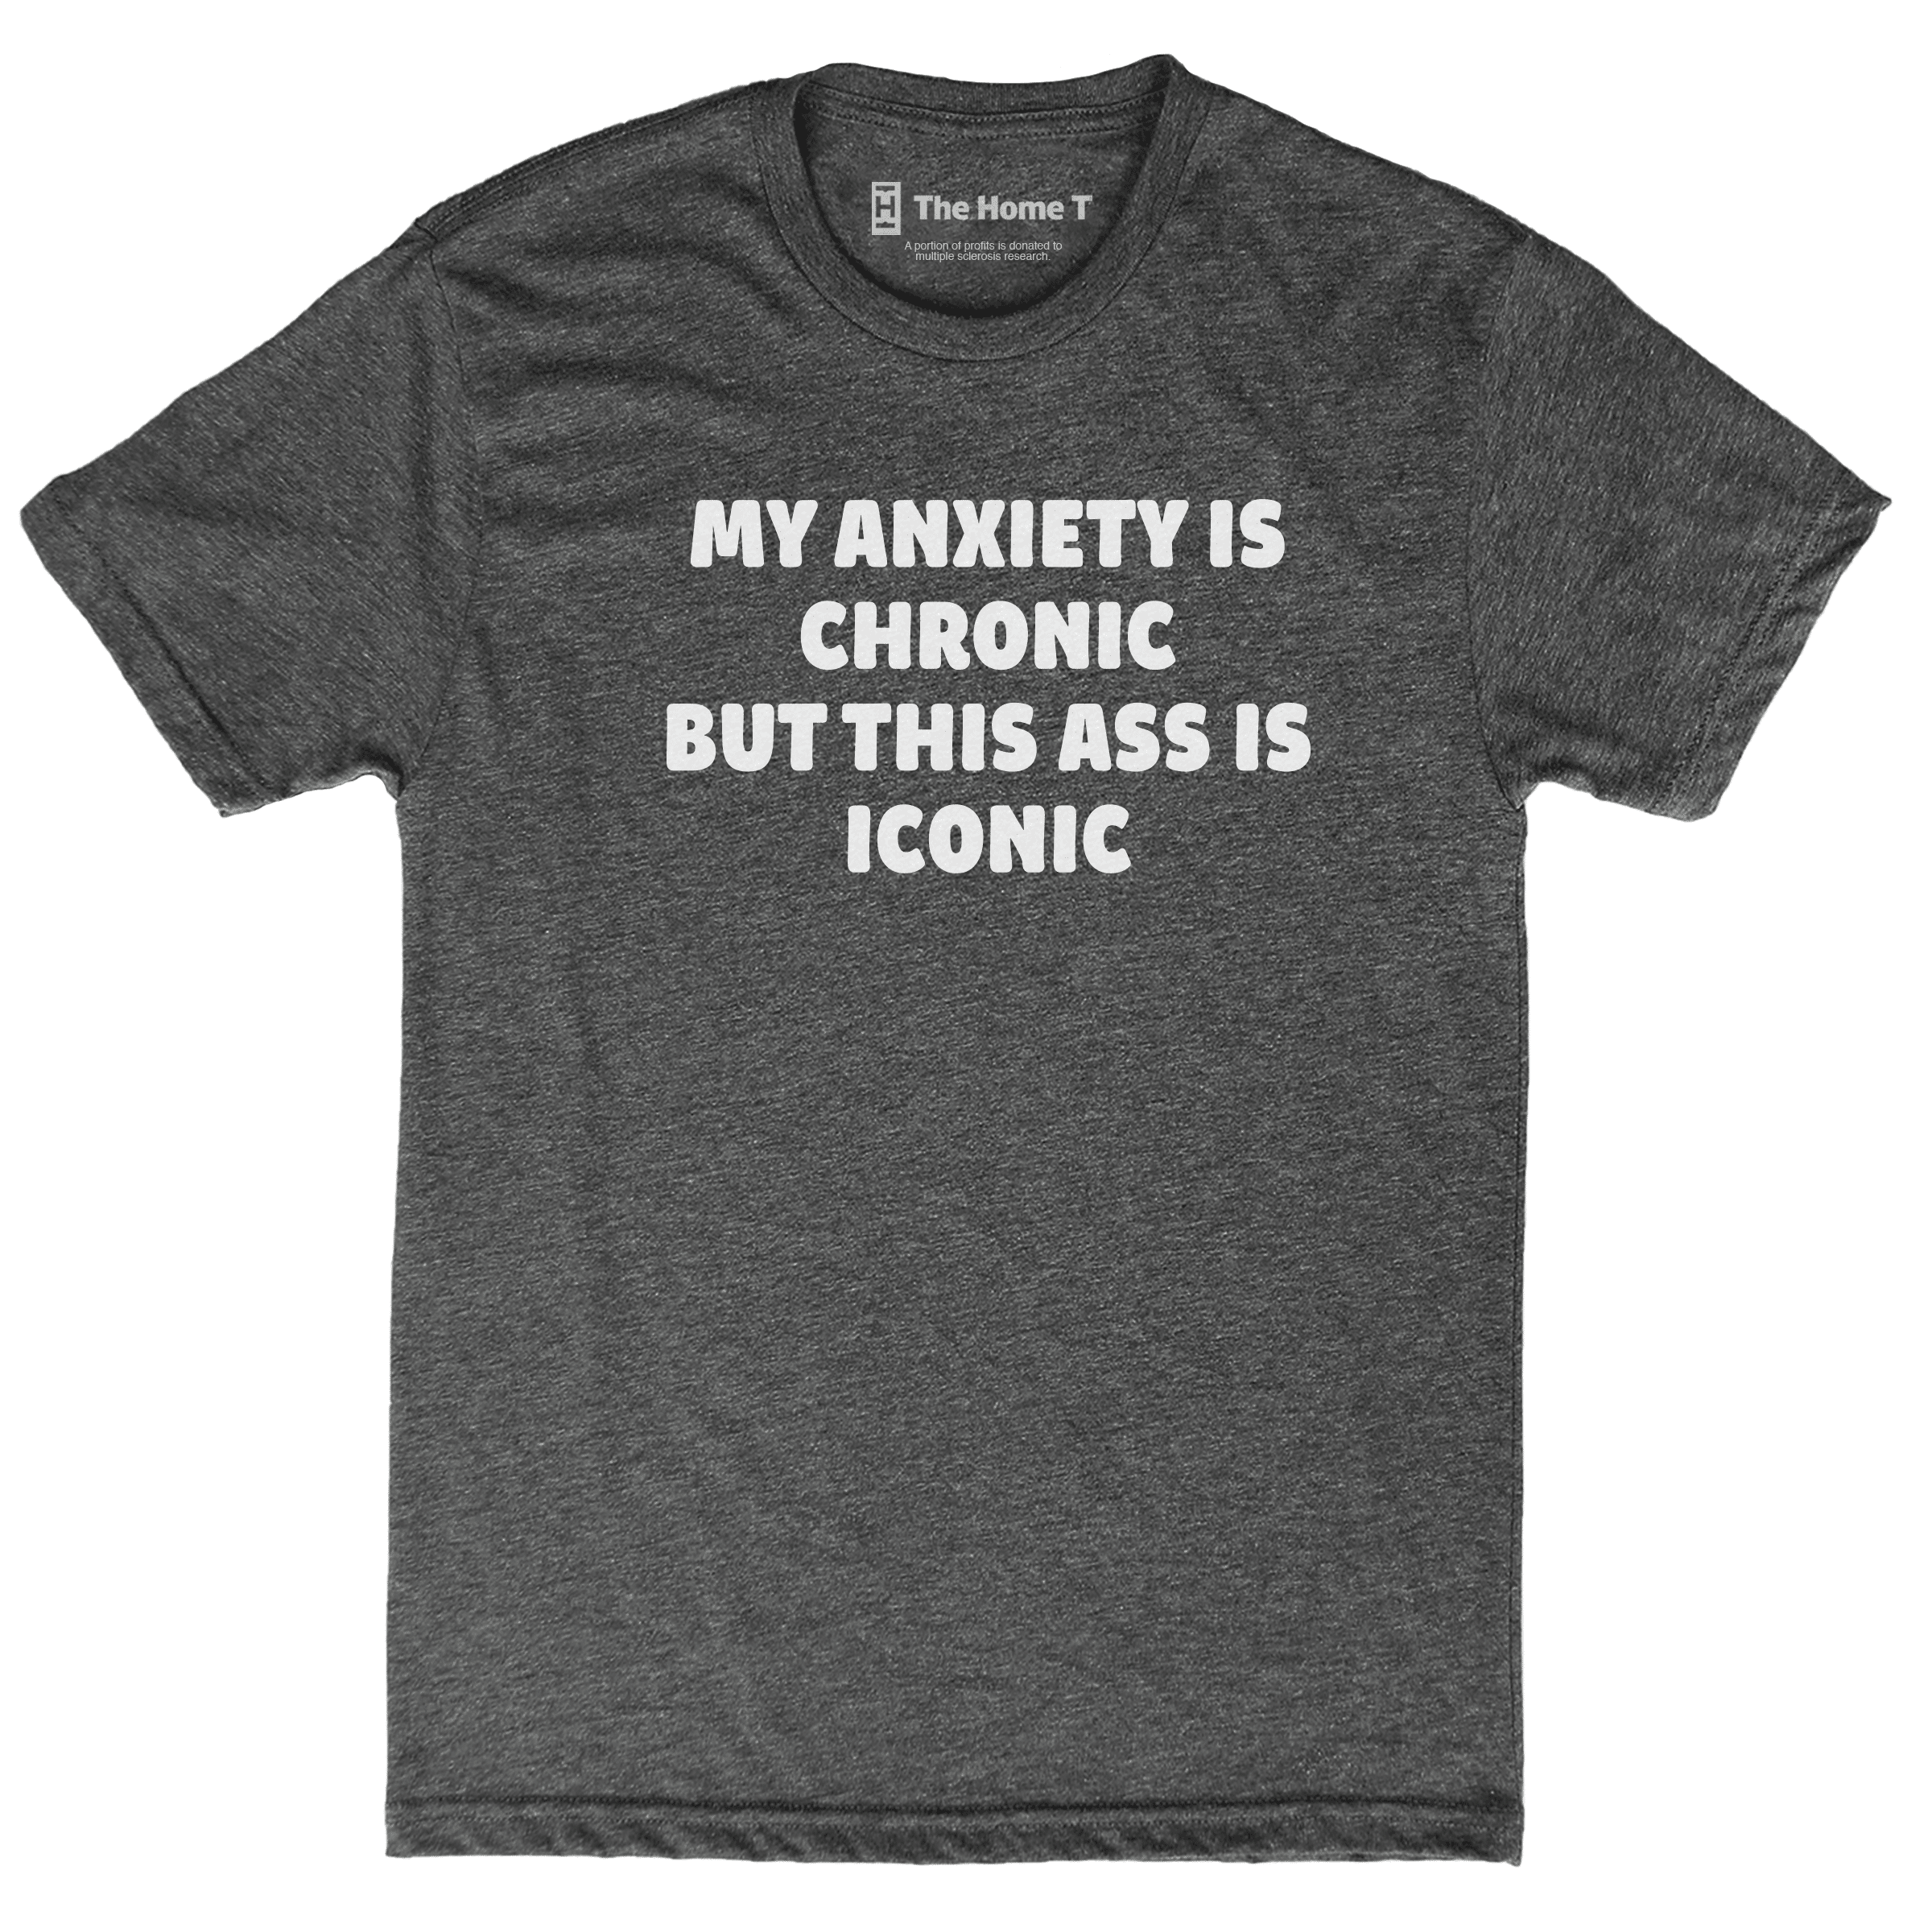 My Anxiety is Chronic